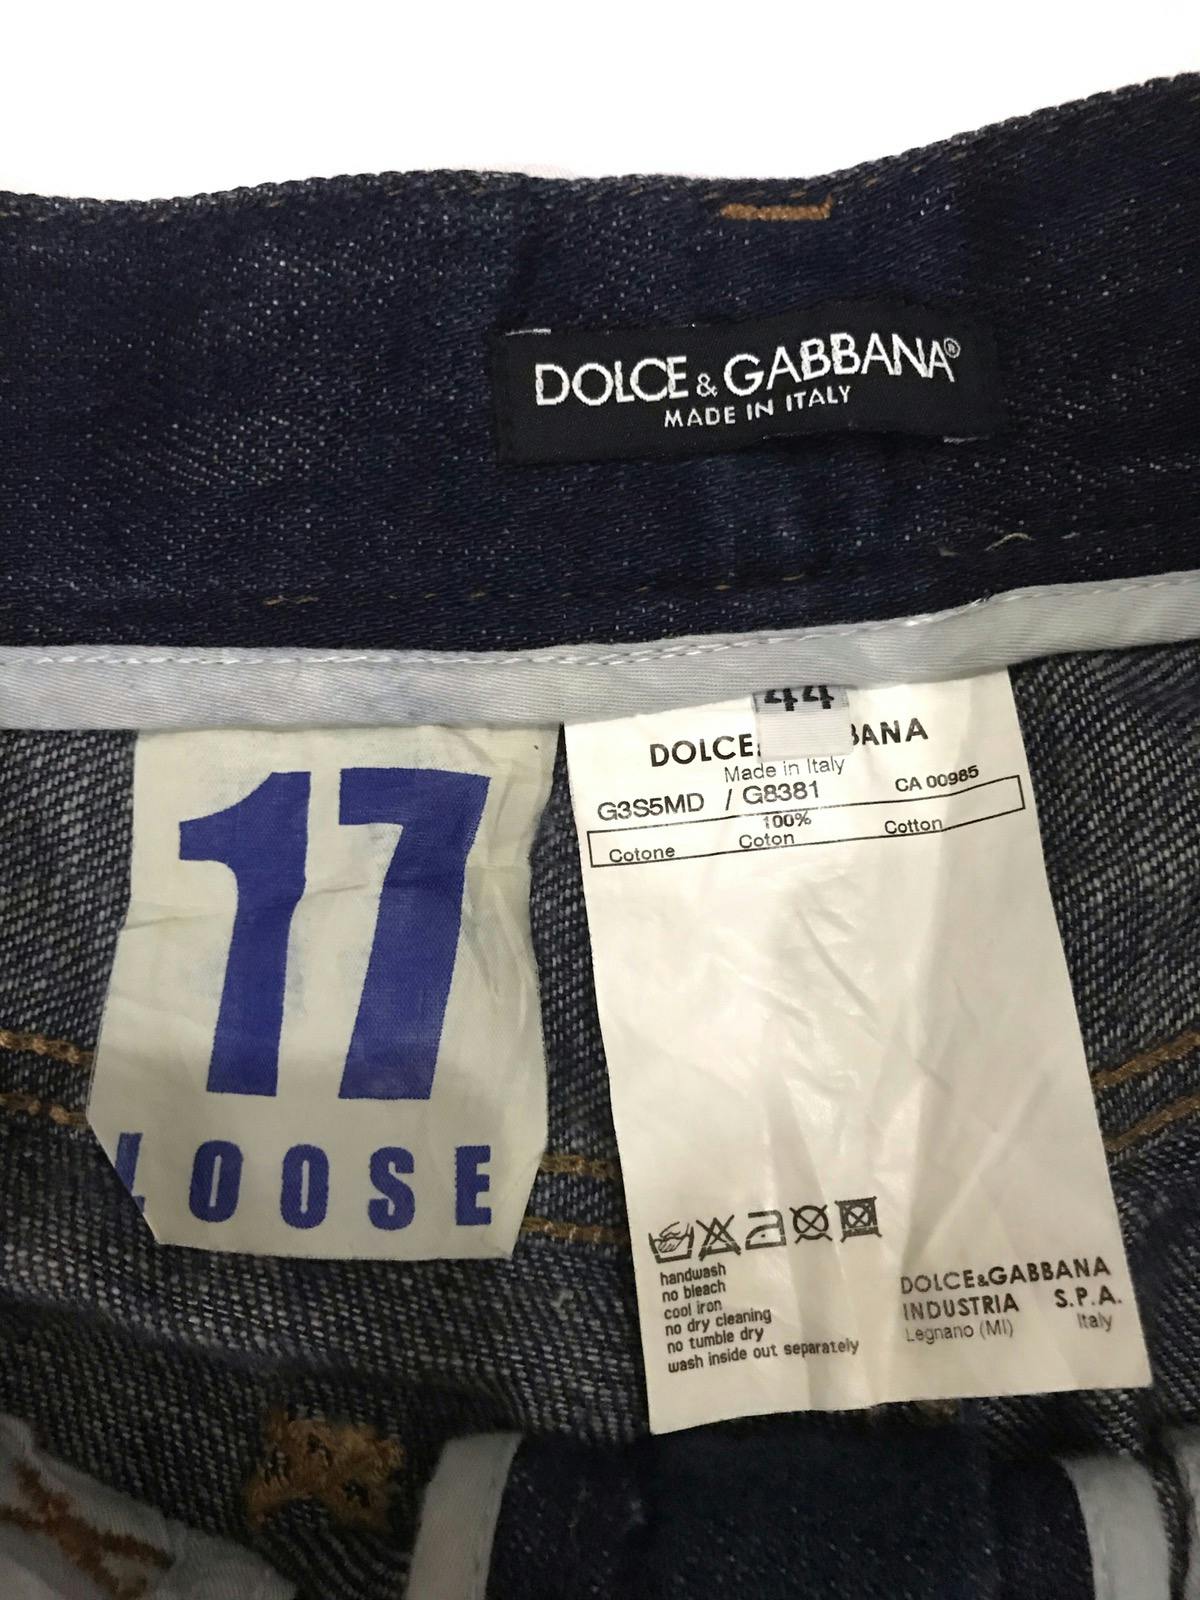 Dolce & Gabanna D&G 17 Loose Denim Jeans Made in Italy 🇮🇹 - 6